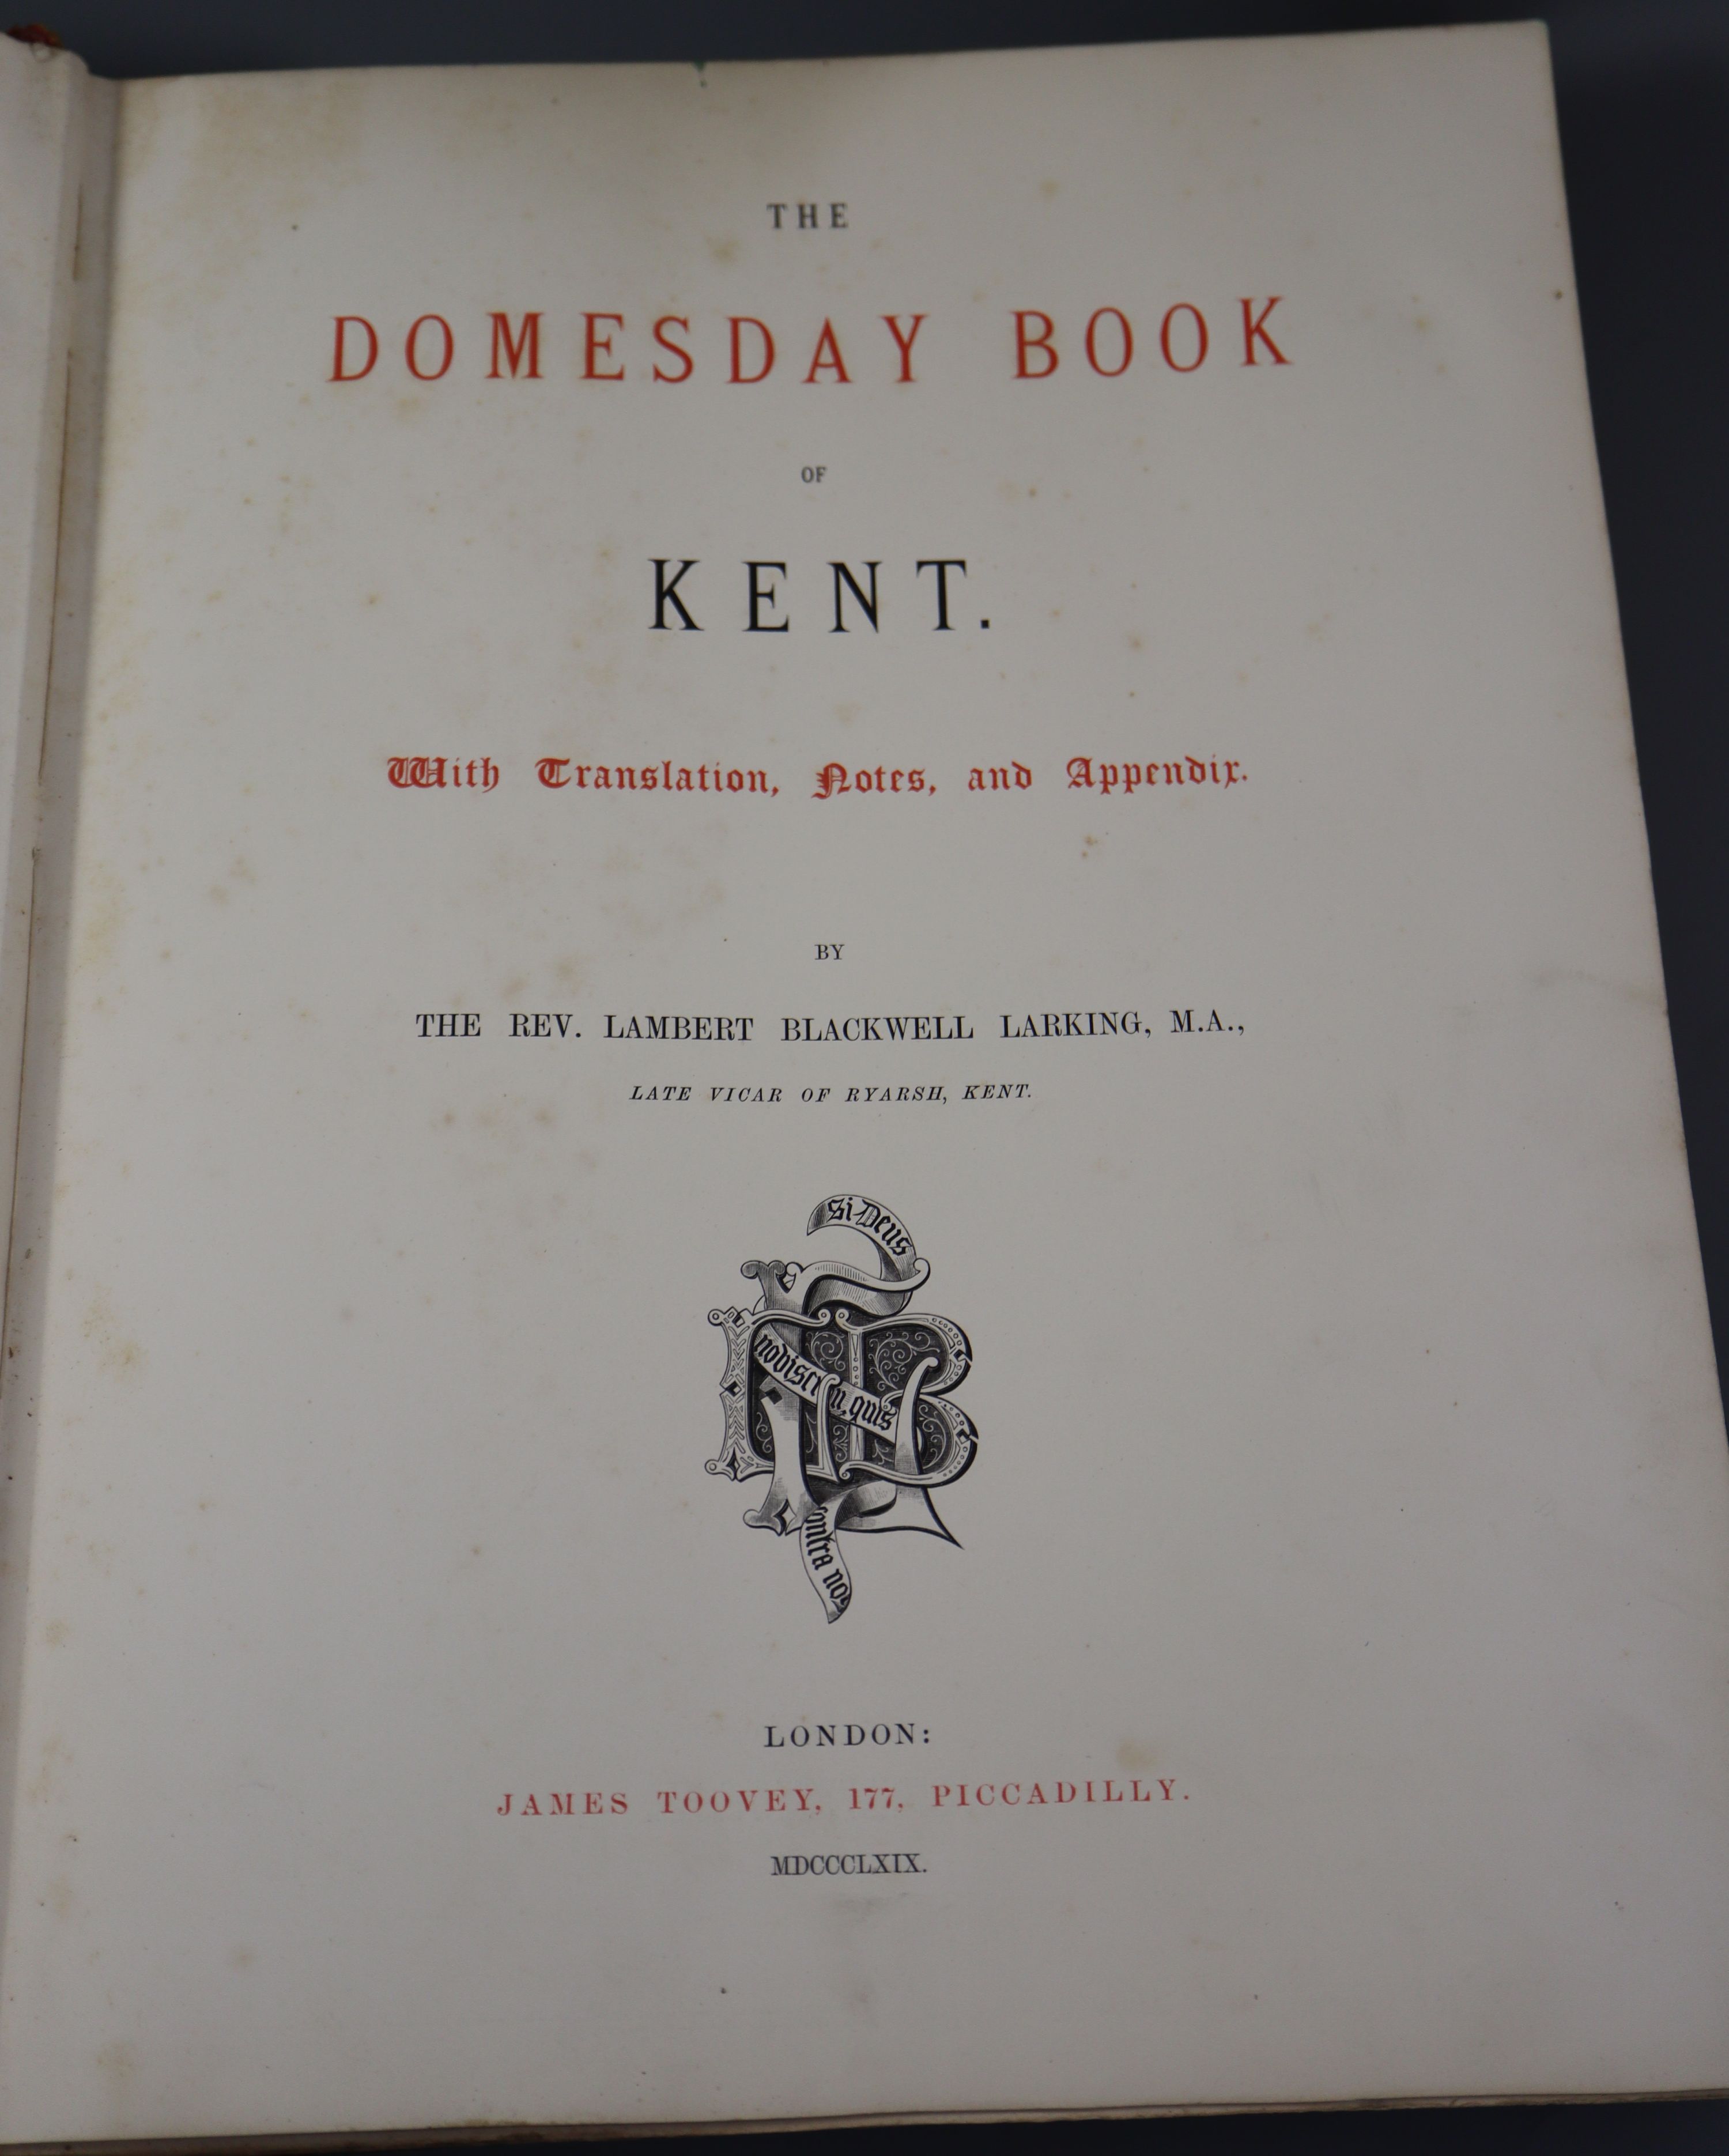 Berry, William - Pedigrees of the Families in the County of Kent, London 1830; Larking, Lambert - Image 2 of 15